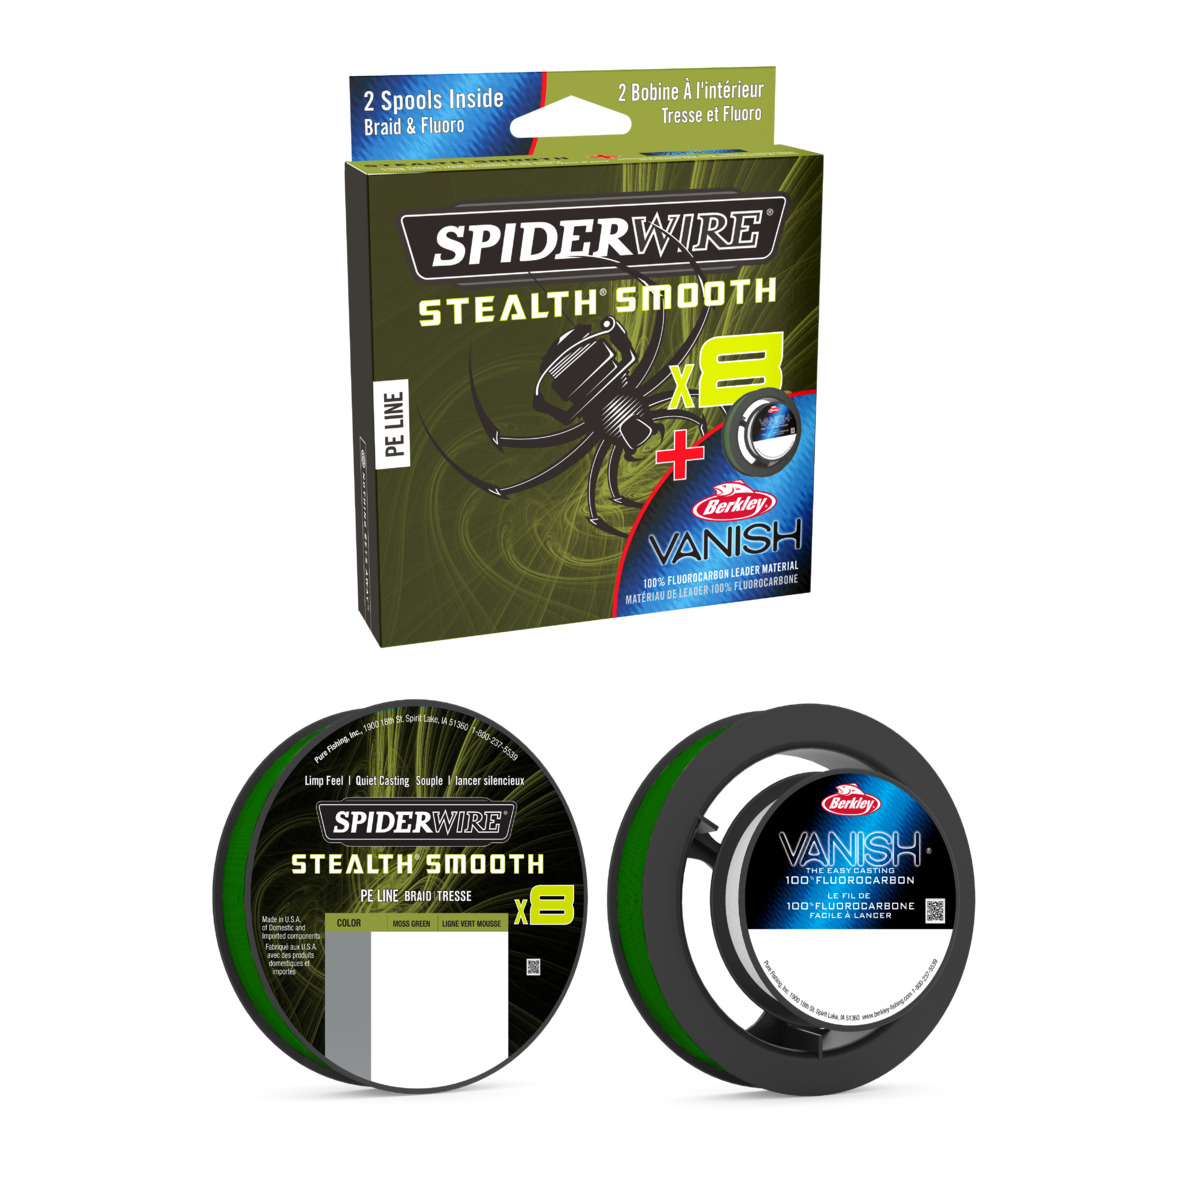 Spiderwire 8 Braid And Fluorocarbon Duo Spool System - 150 m msgrn/Vanish 50 m 0.09/0.25 mm